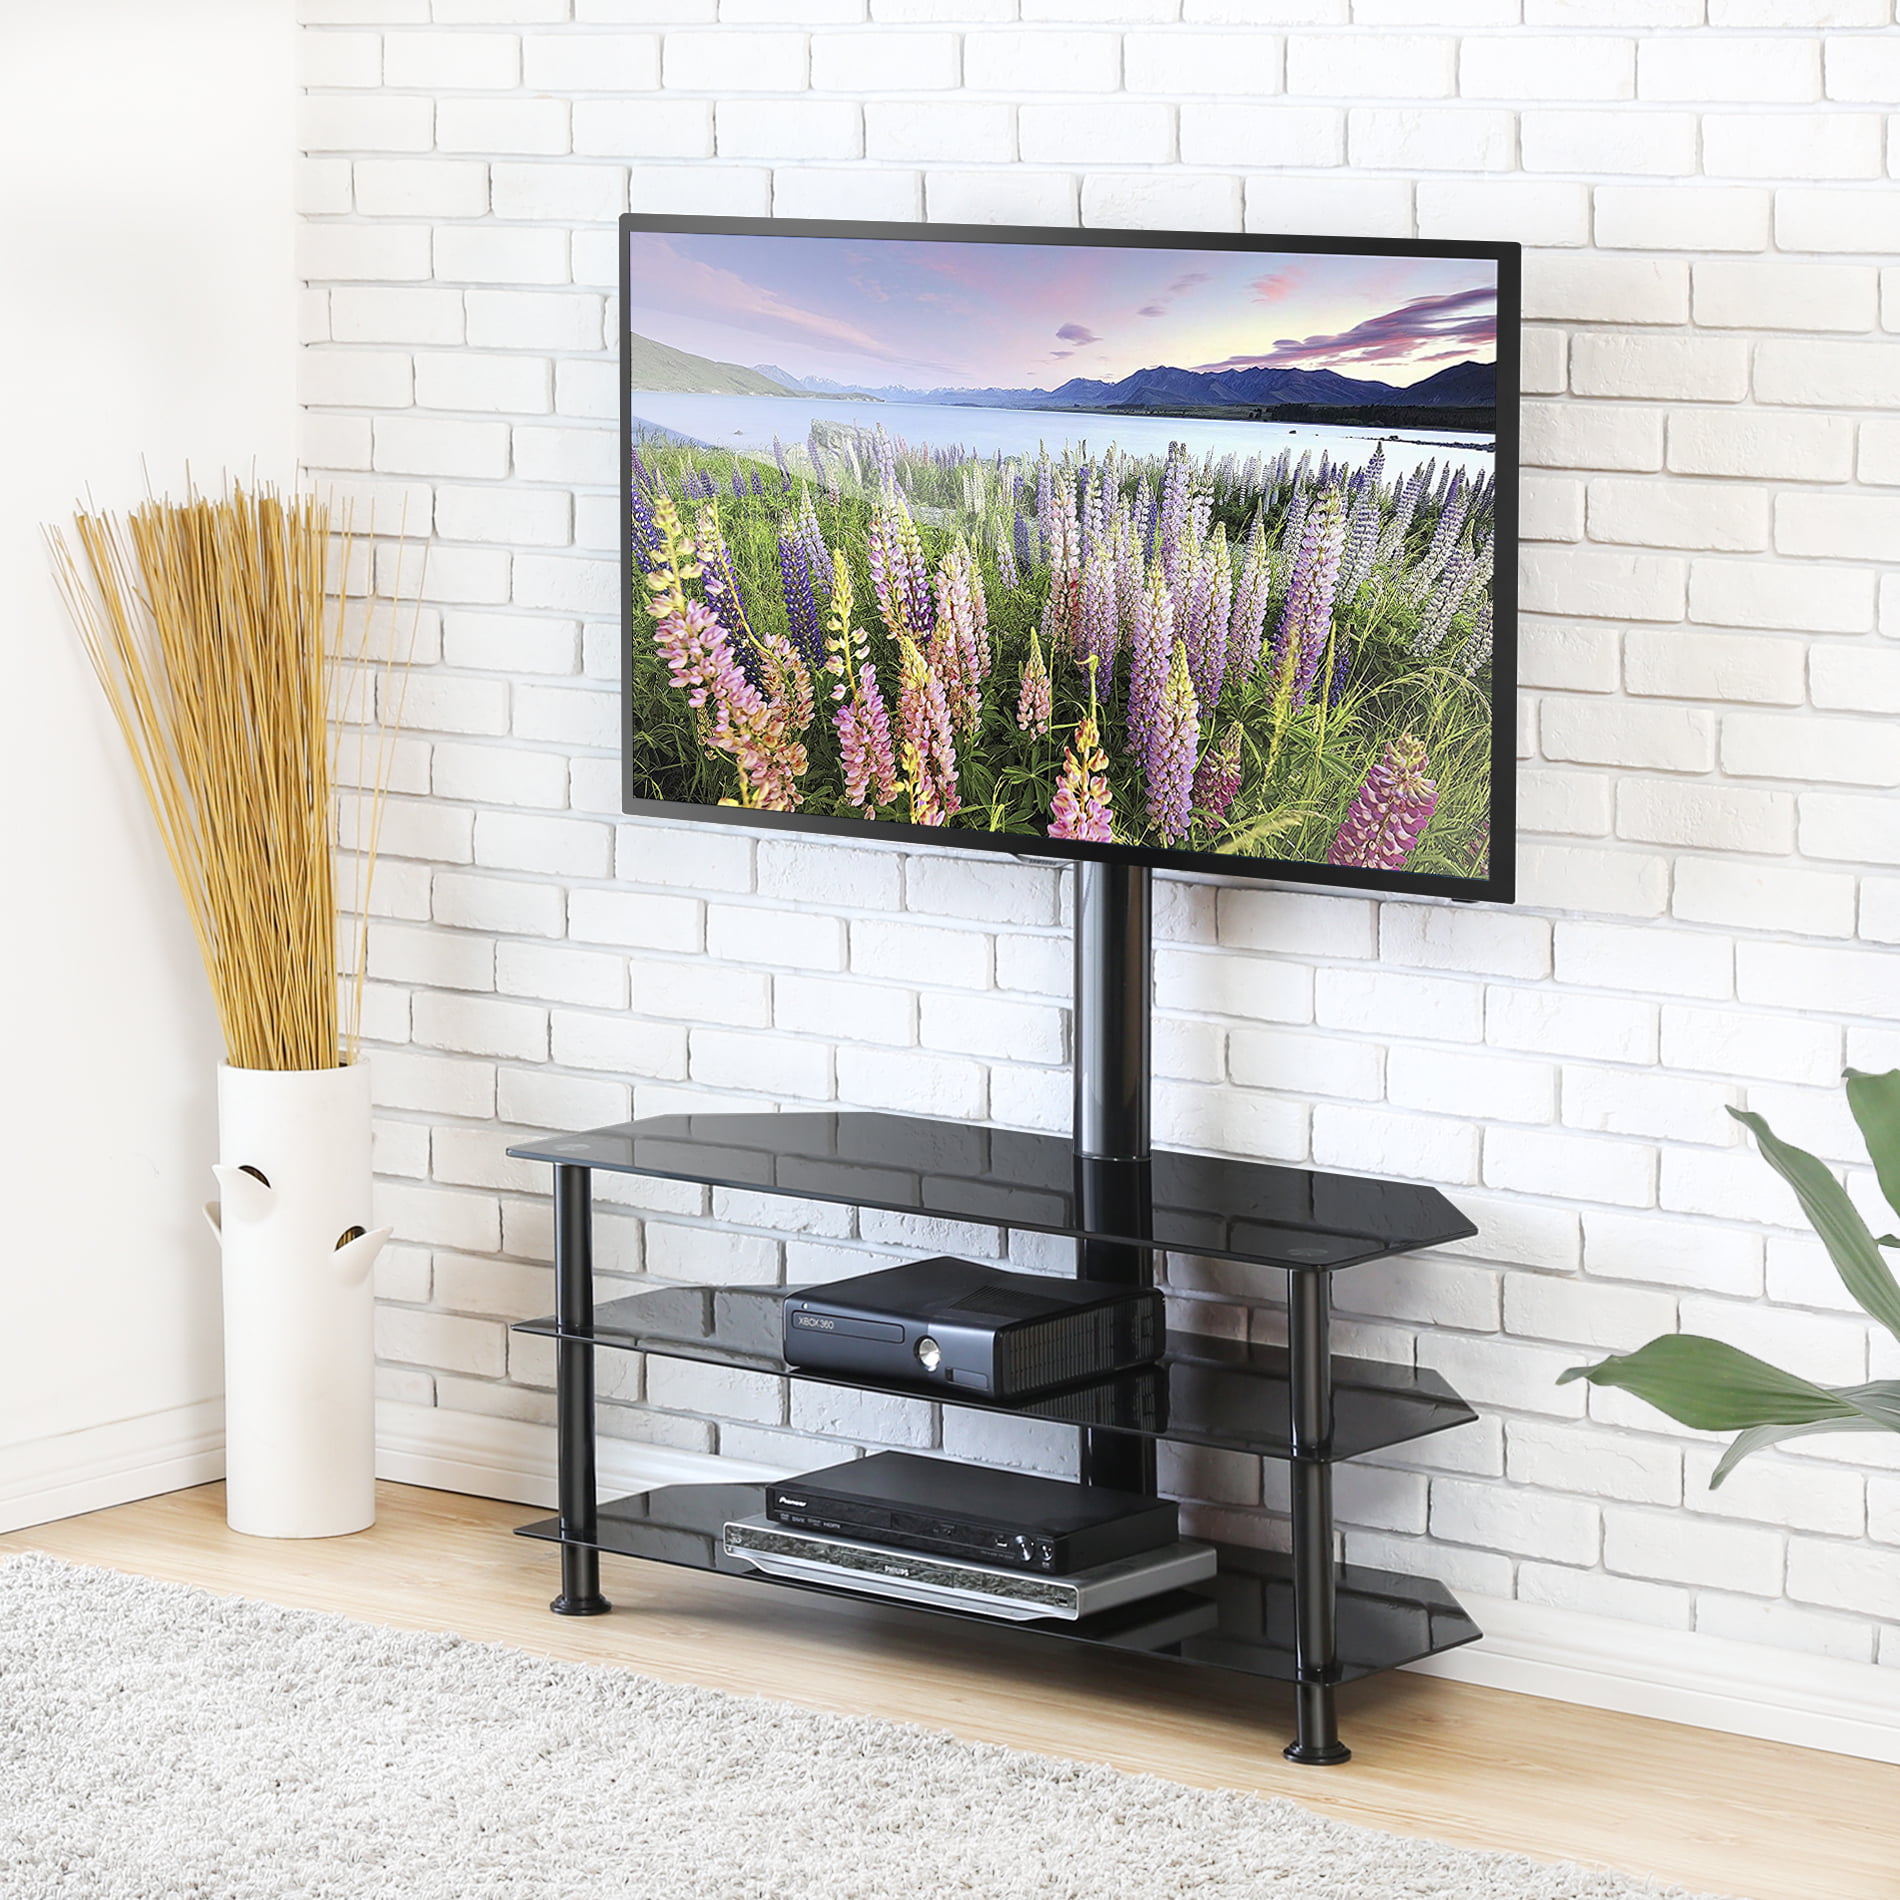 FITUEYES Swivel Floor TV Stand with Mount, Height ...